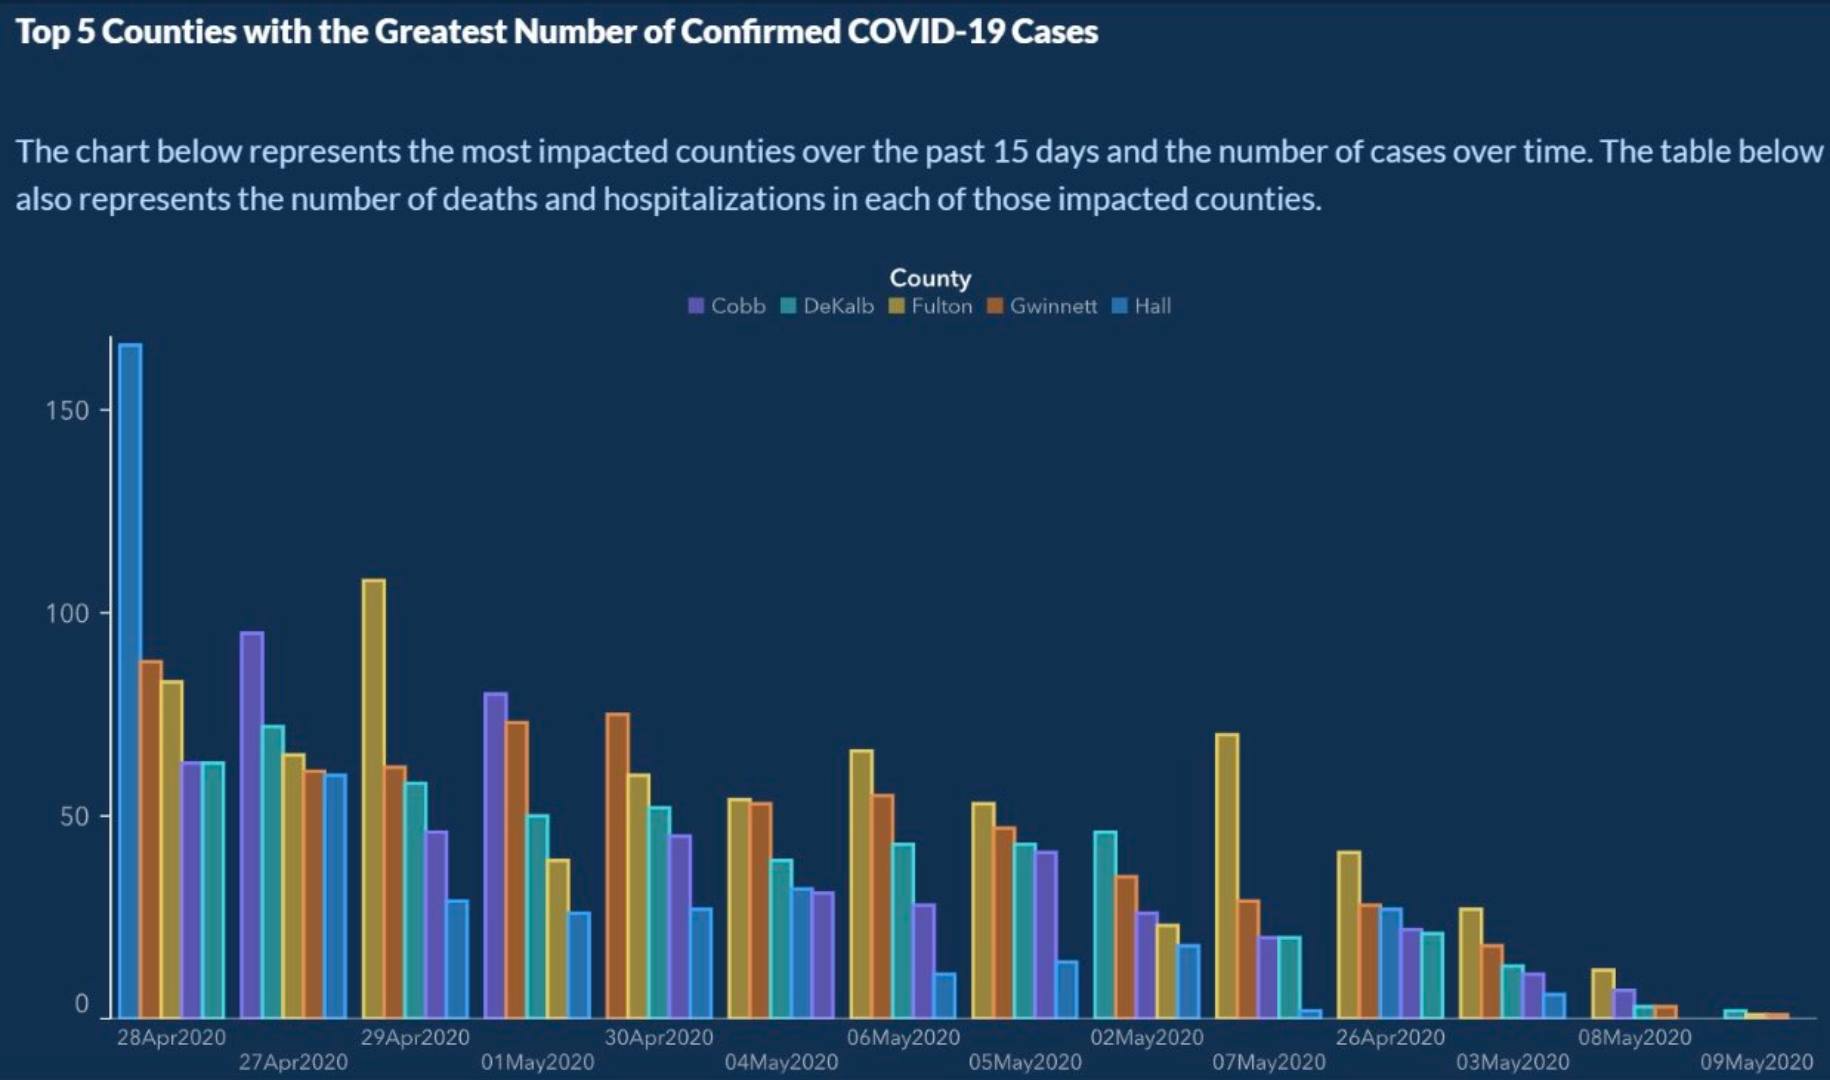 US State of Georgia, COVID-19 Deaths,
Source: https://ftalphaville.ft.com/2020/05/18/1589795135000/When-axes-get-truly-evil/